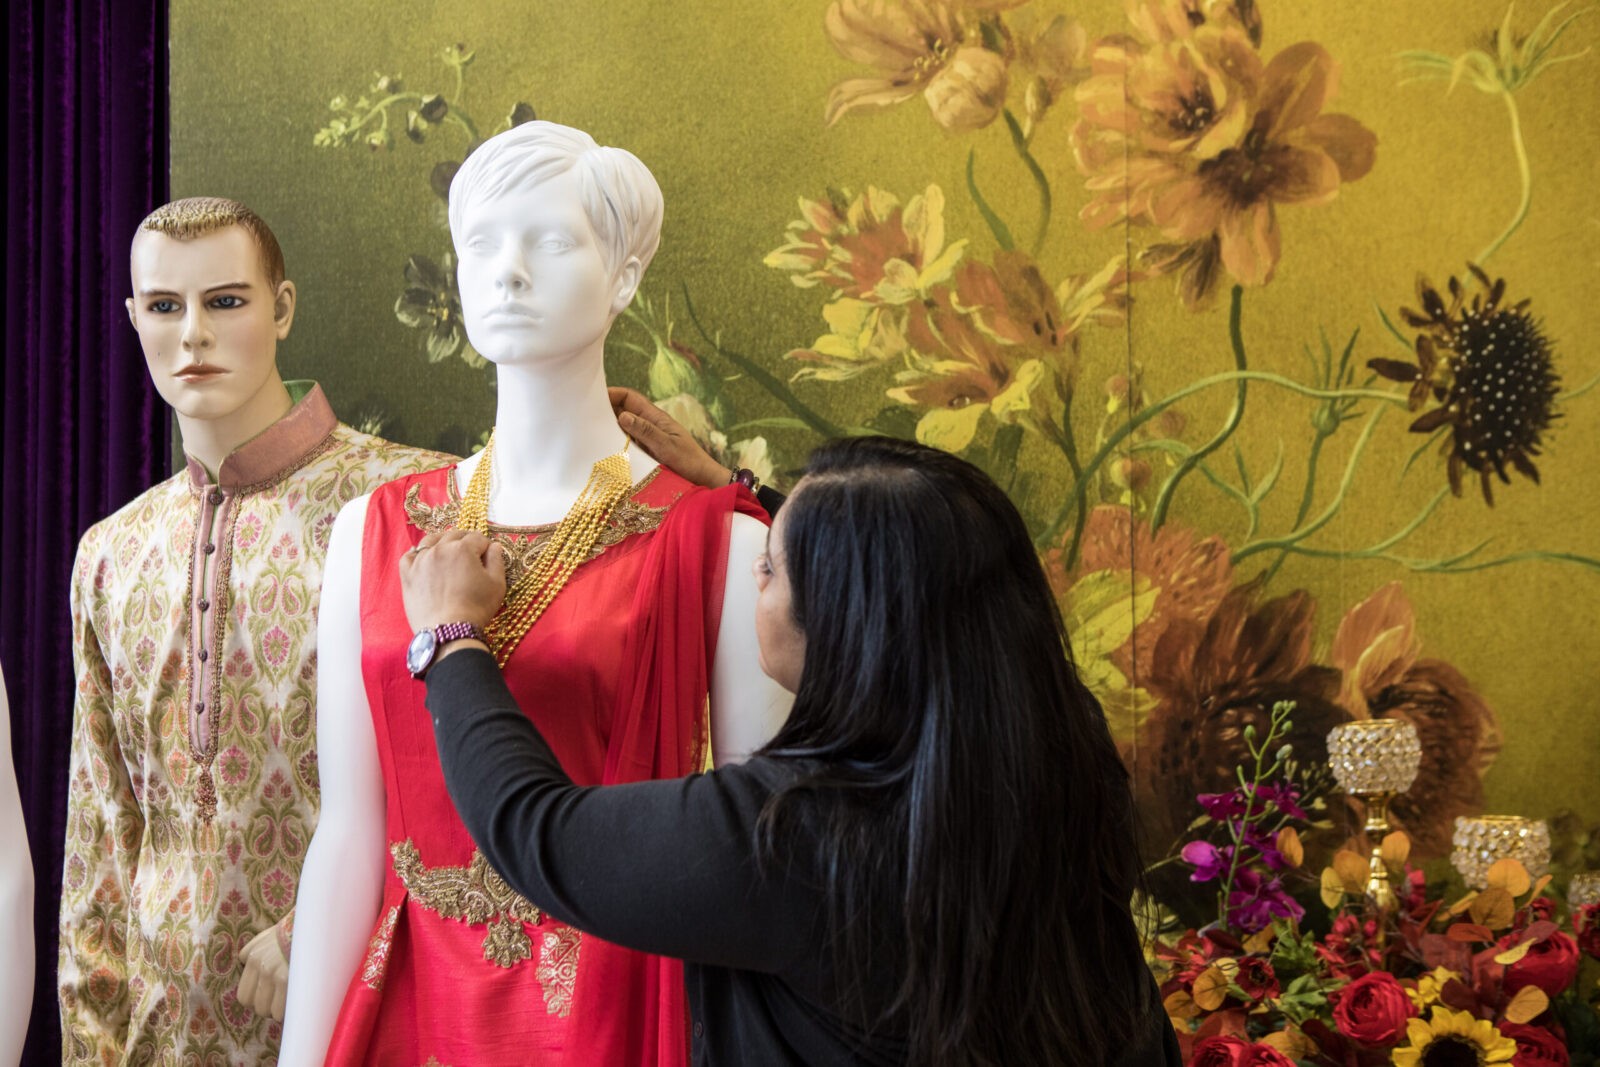 Julie, with medium skin and dark hair, styling a mannequin in a a red sleeveless dress with gold embroidery with a gold necklace. Another mannequin wears a floral patterned kurta.